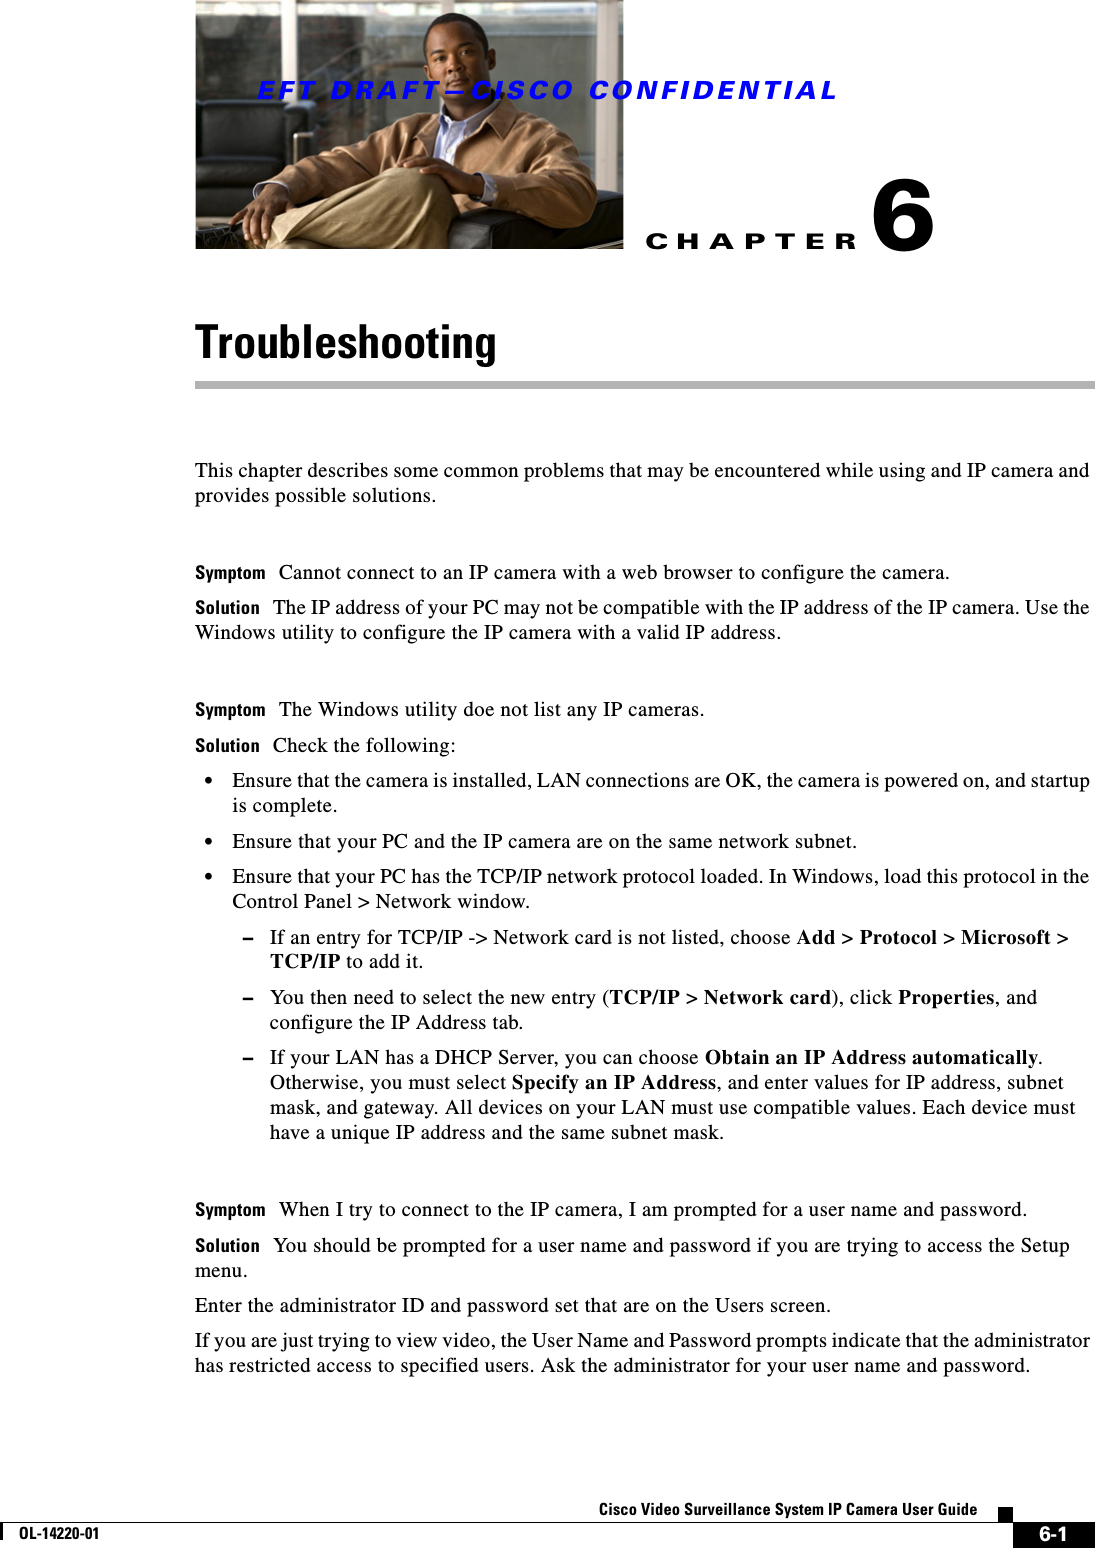 CHAPTEREFT DRAFT—CISCO CONFIDENTIAL6-1Cisco Video Surveillance System IP Camera User GuideOL-14220-016TroubleshootingThis chapter describes some common problems that may be encountered while using and IP camera and provides possible solutions.Symptom Cannot connect to an IP camera with a web browser to configure the camera.Solution The IP address of your PC may not be compatible with the IP address of the IP camera. Use the Windows utility to configure the IP camera with a valid IP address.Symptom The Windows utility doe not list any IP cameras.Solution Check the following:•Ensure that the camera is installed, LAN connections are OK, the camera is powered on, and startup is complete.•Ensure that your PC and the IP camera are on the same network subnet. •Ensure that your PC has the TCP/IP network protocol loaded. In Windows, load this protocol in the Control Panel &gt; Network window.–If an entry for TCP/IP -&gt; Network card is not listed, choose Add &gt; Protocol &gt; Microsoft &gt; TCP/IP to add it. –You then need to select the new entry (TCP/IP &gt; Network card), click Properties, and configure the IP Address tab. –If your LAN has a DHCP Server, you can choose Obtain an IP Address automatically. Otherwise, you must select Specify an IP Address, and enter values for IP address, subnet mask, and gateway. All devices on your LAN must use compatible values. Each device must have a unique IP address and the same subnet mask.Symptom When I try to connect to the IP camera, I am prompted for a user name and password.Solution You should be prompted for a user name and password if you are trying to access the Setup menu. Enter the administrator ID and password set that are on the Users screen.If you are just trying to view video, the User Name and Password prompts indicate that the administrator has restricted access to specified users. Ask the administrator for your user name and password.